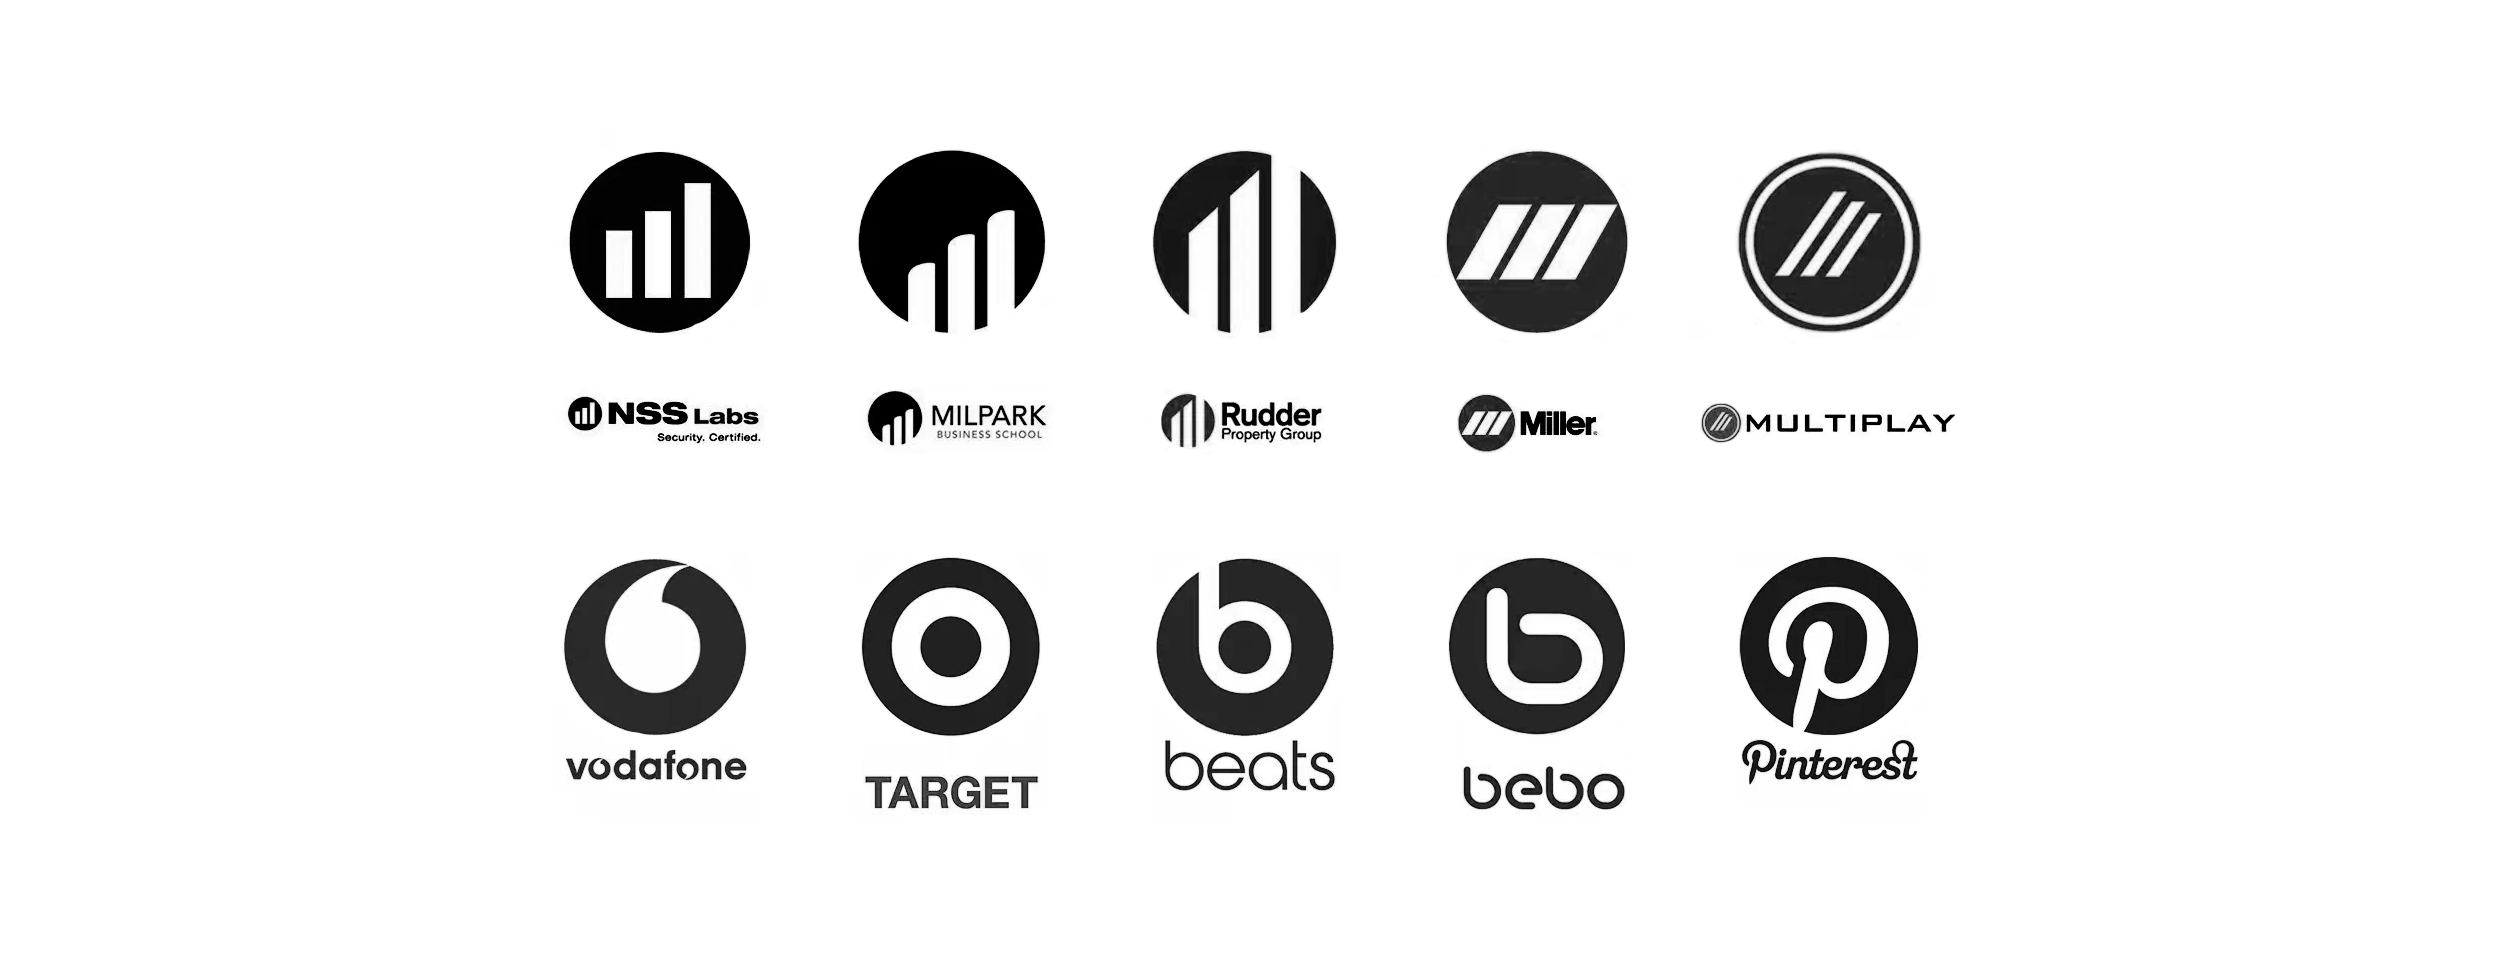 3-simple-ways-to-find-out-if-your-logo-design-is-unique-and-unused